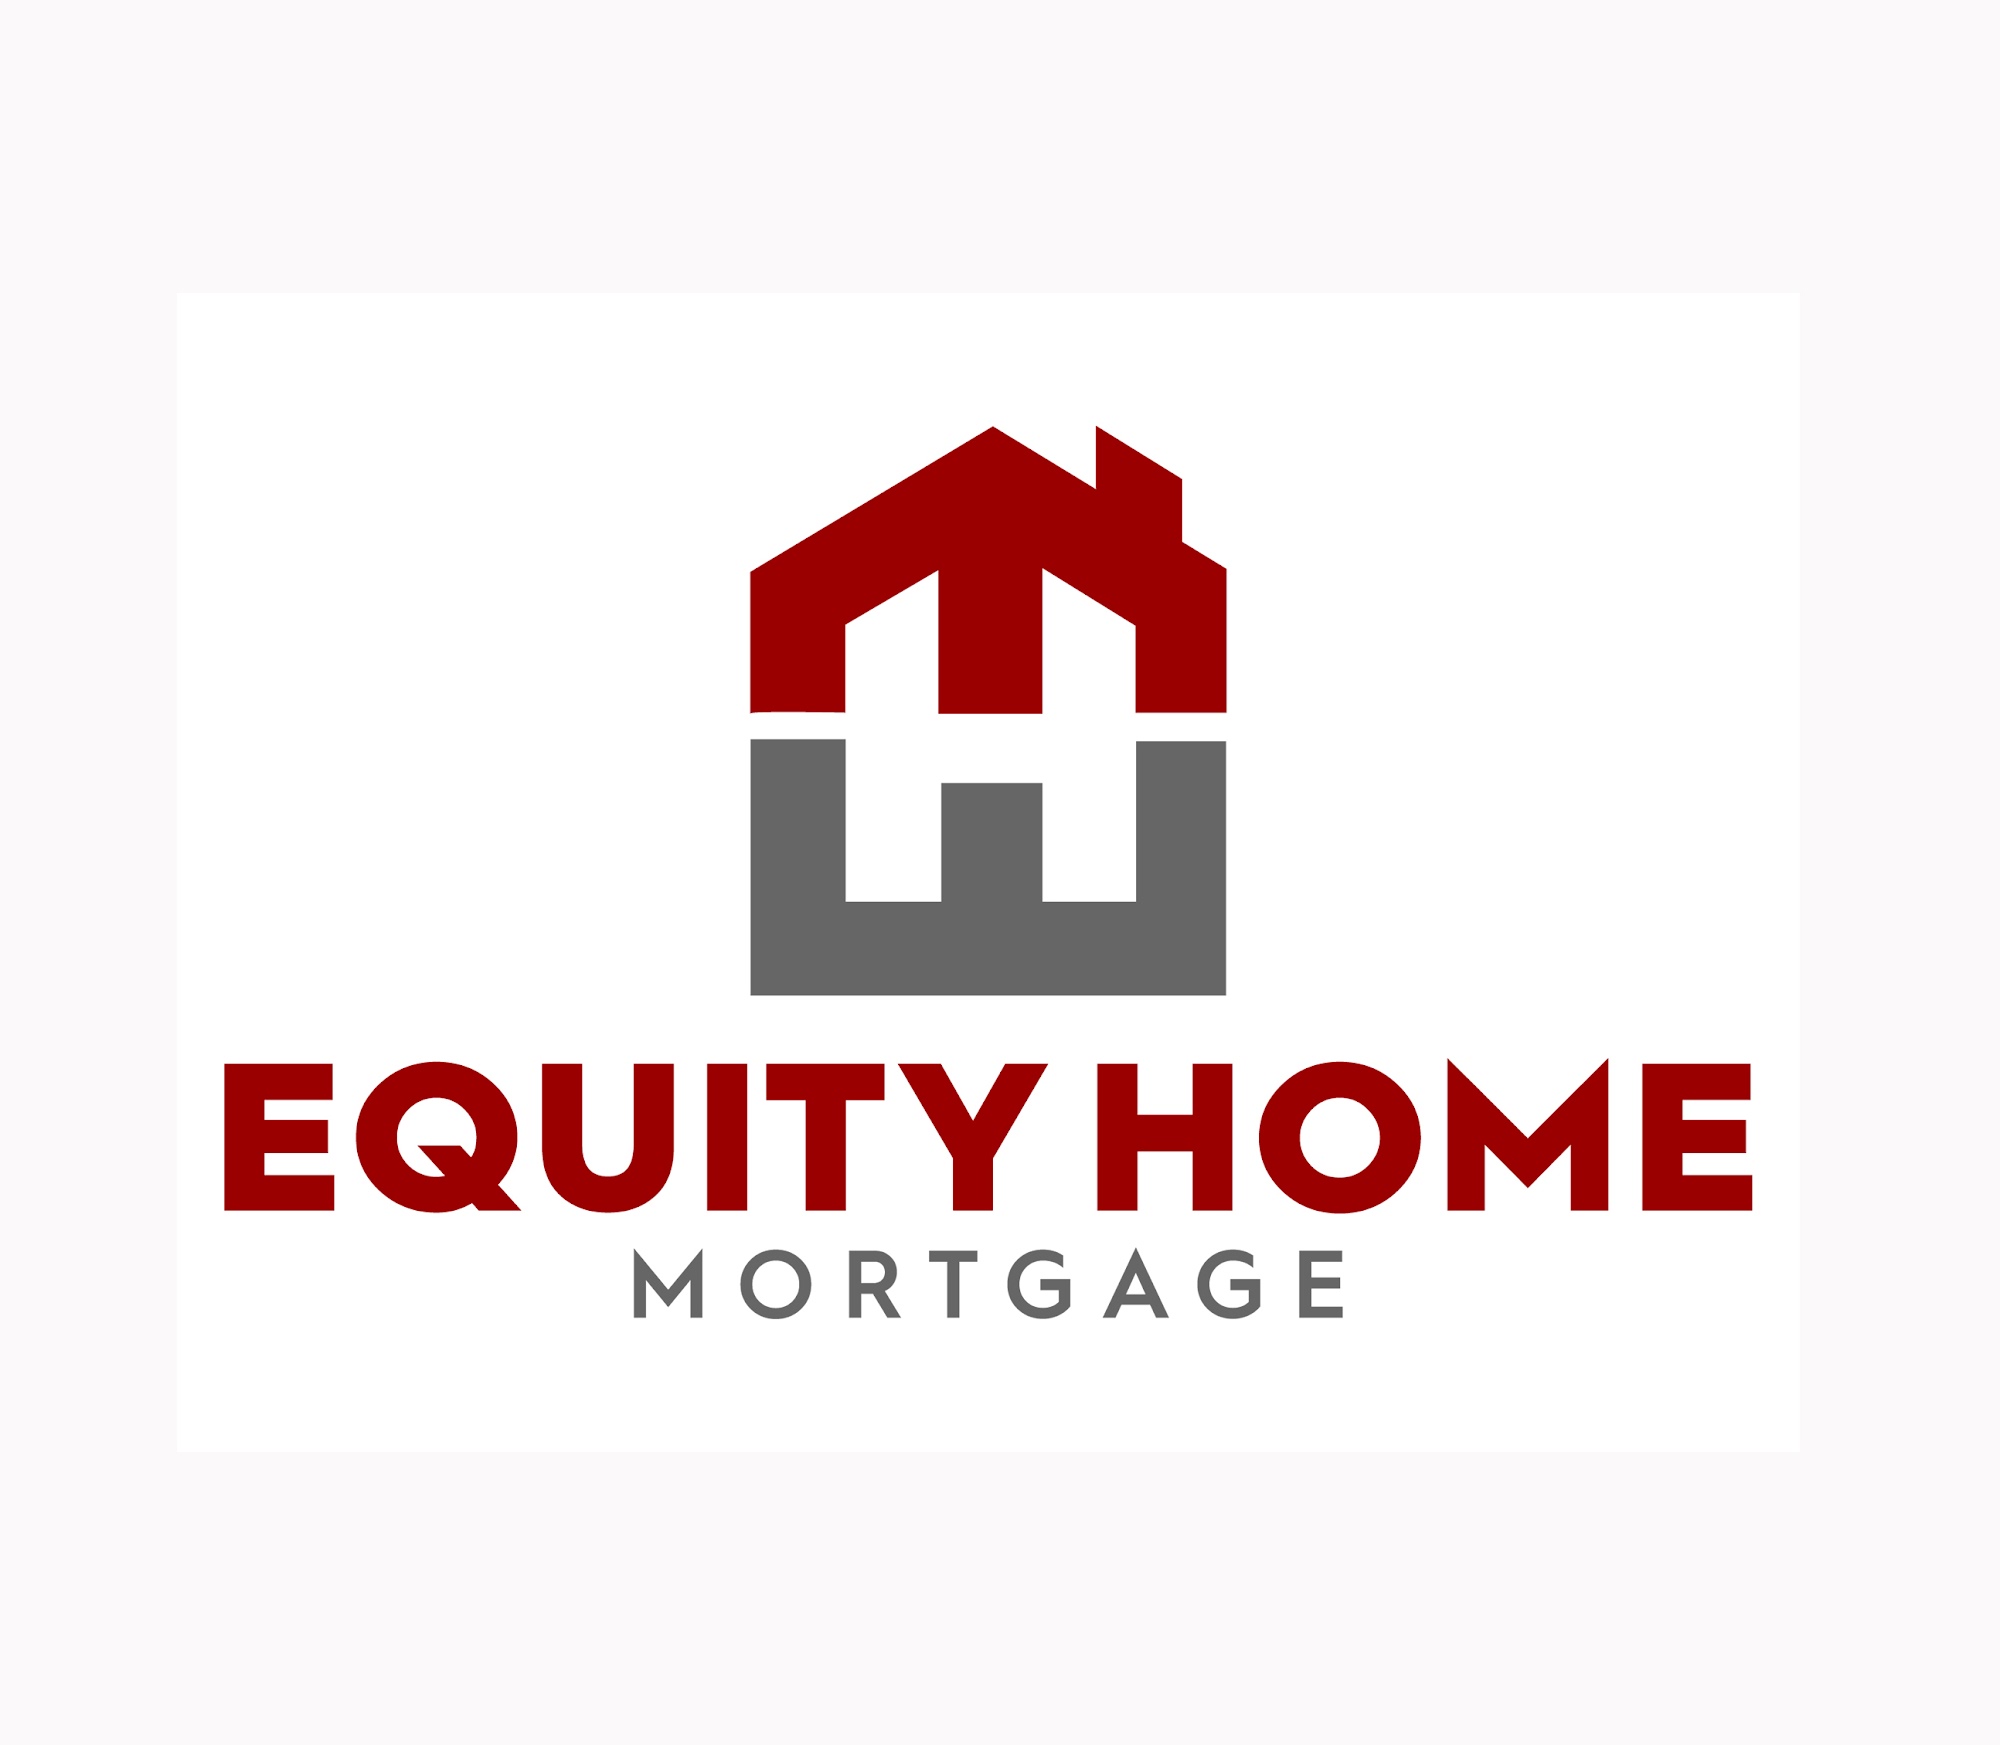 Equity Home Mortgage 59 E Mill Rd bldg 4 suite 5, Long Valley New Jersey 07853